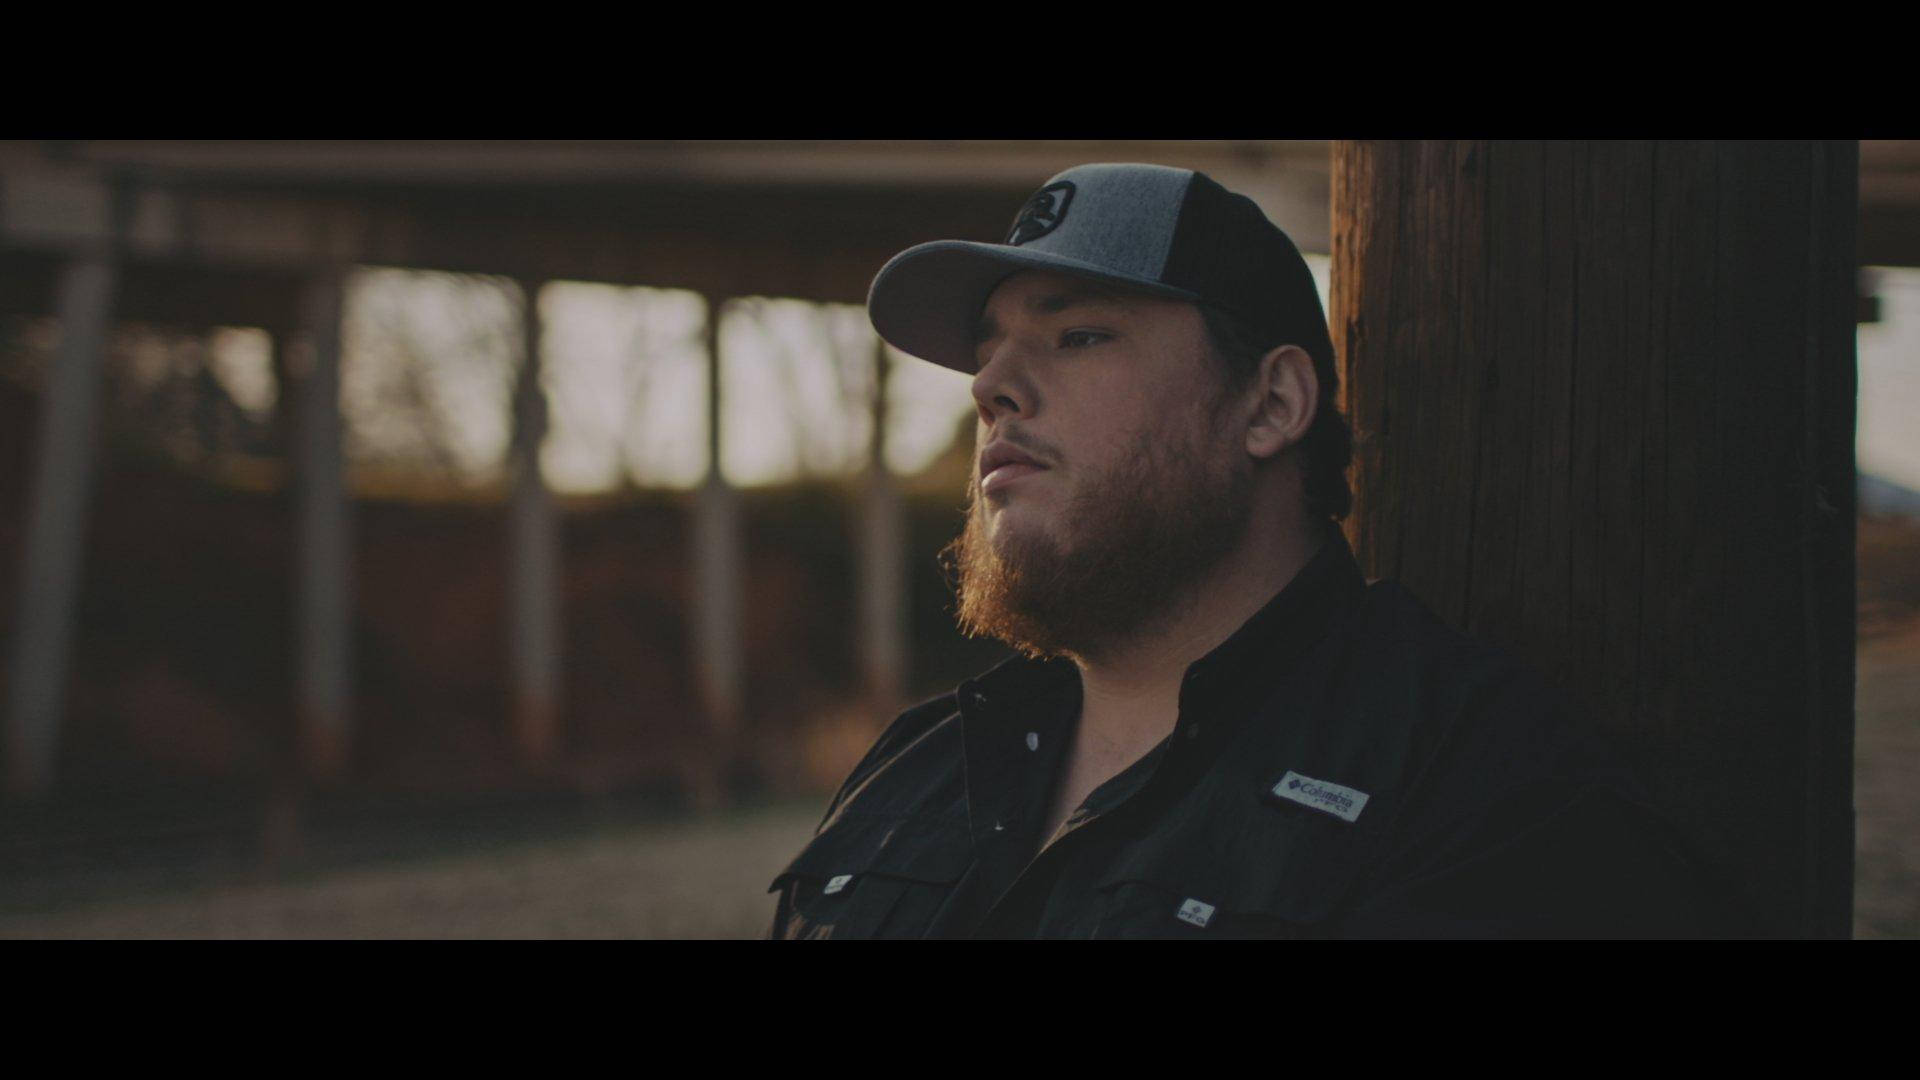 Musician Luke Combs performing on stage with a classic America flag background Wallpaper